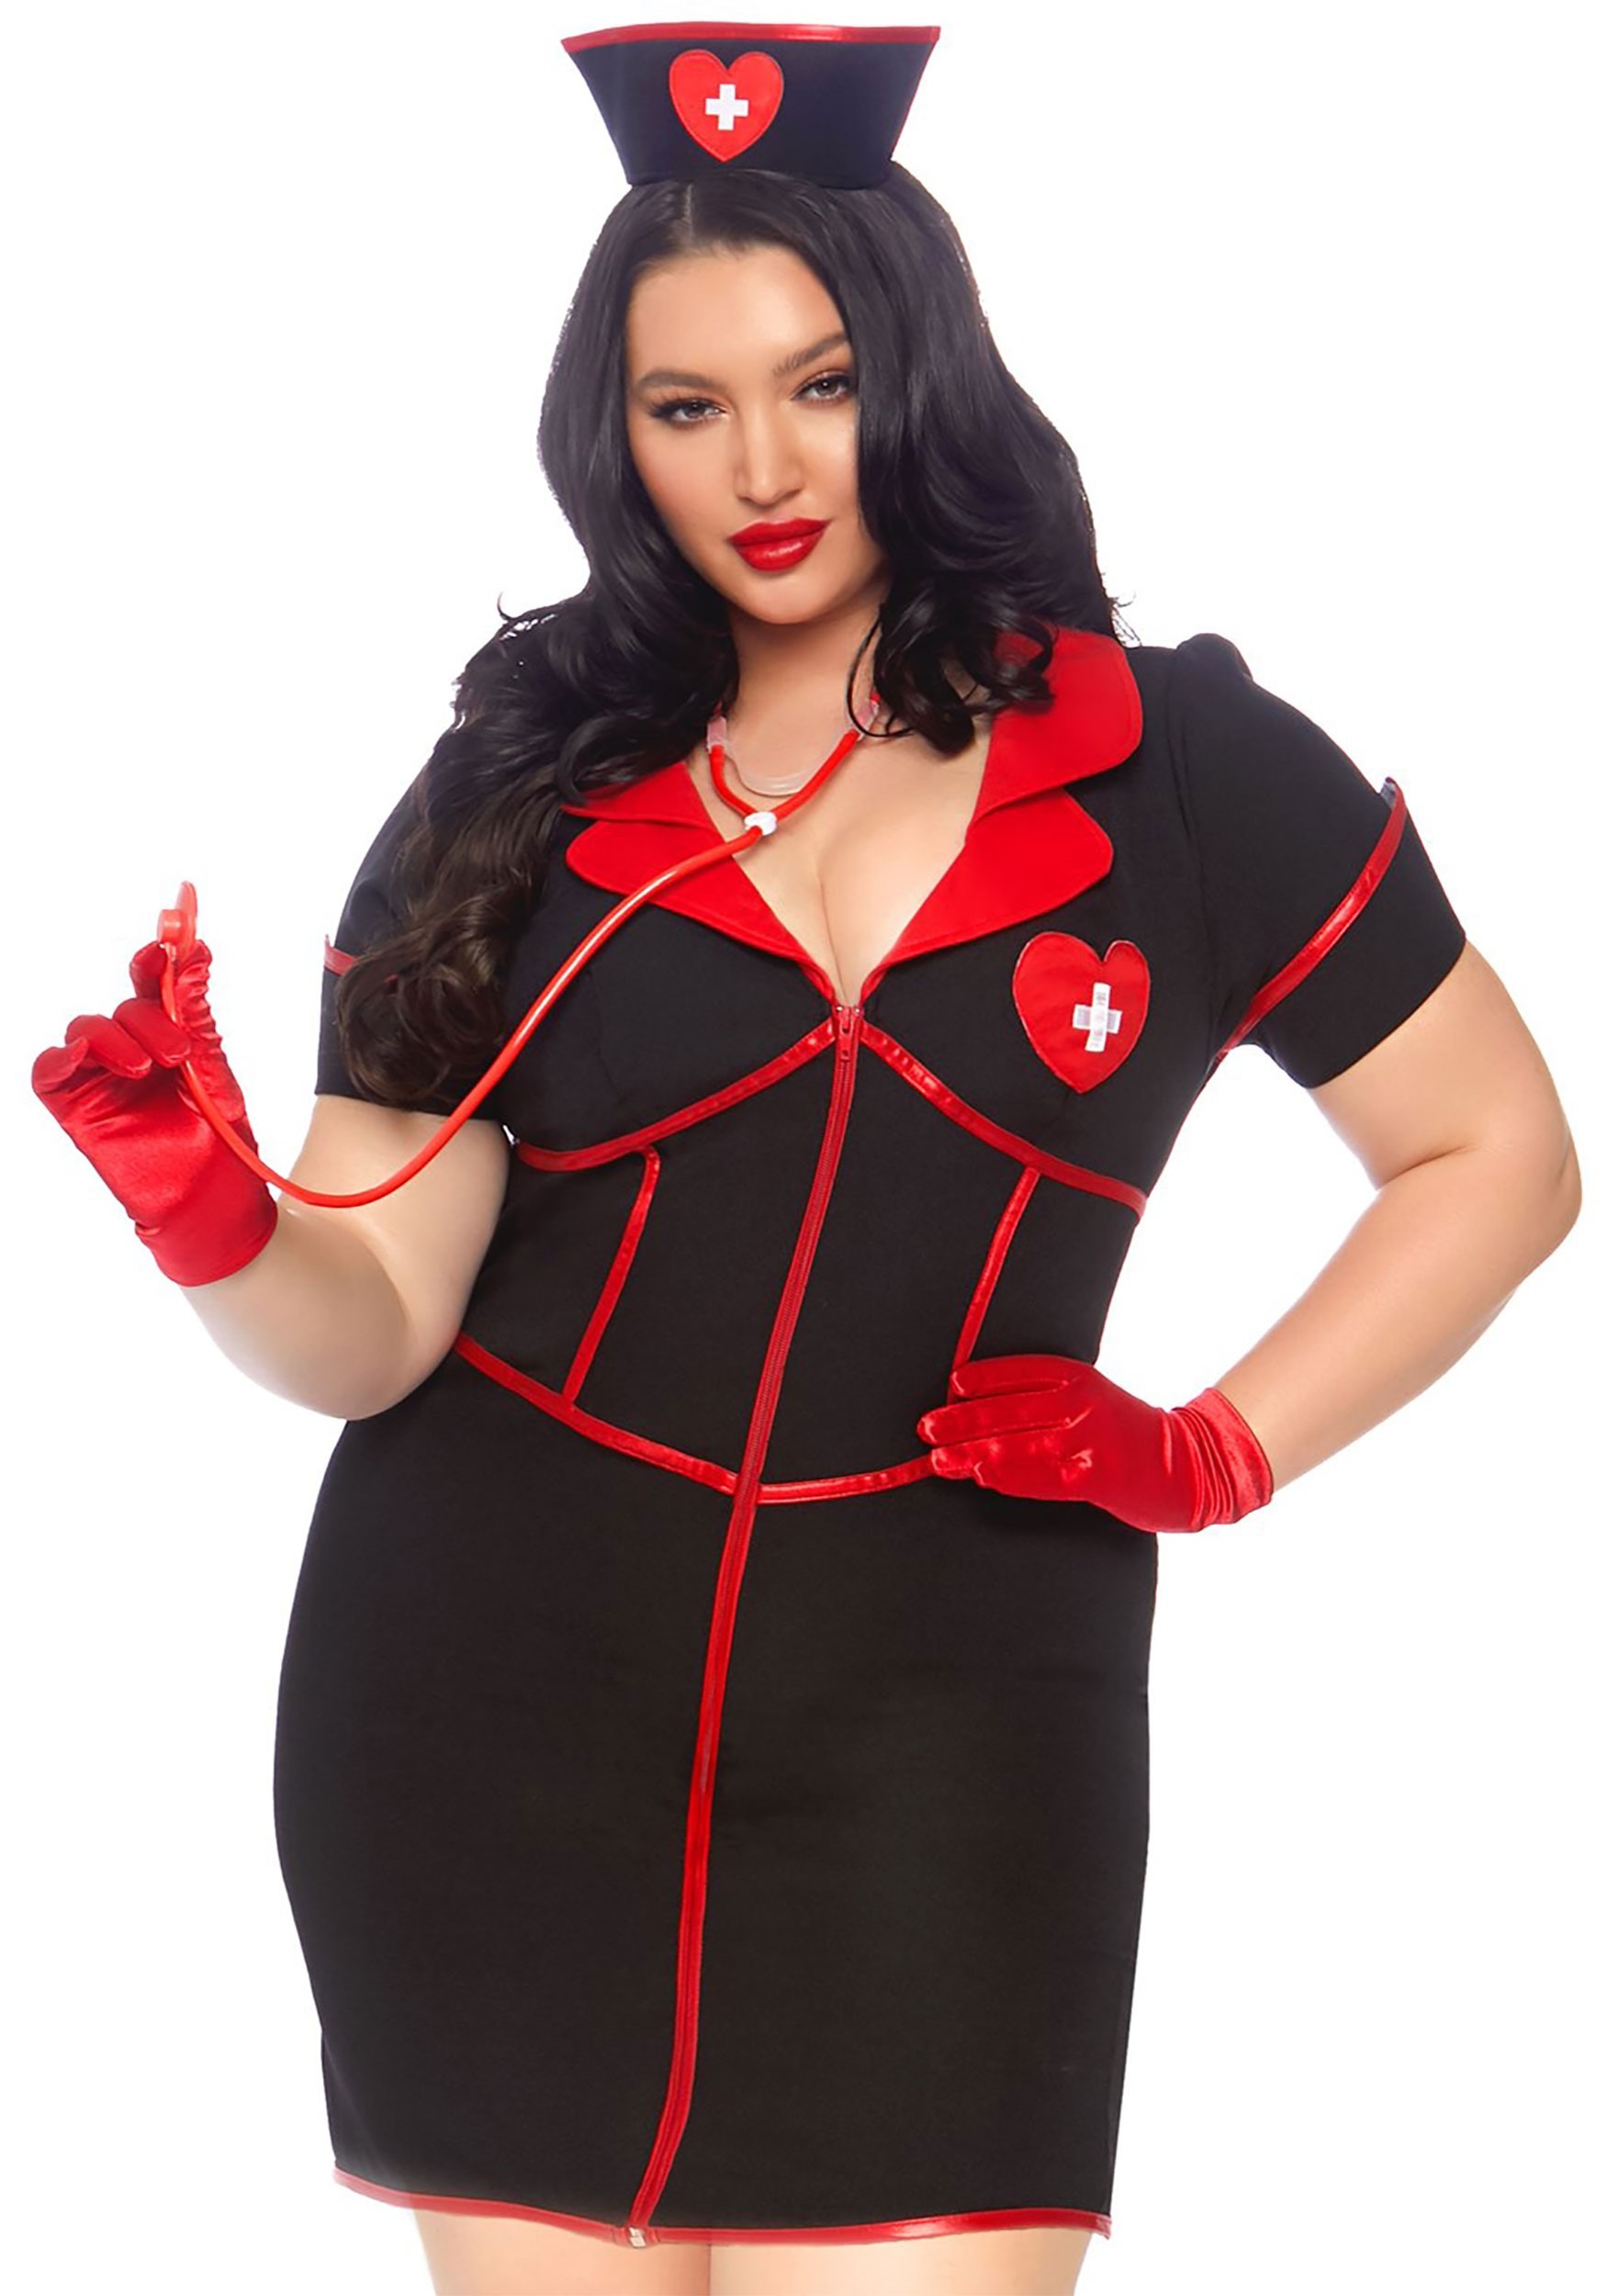 Image of Bedside Babe Adult's Plus Size Costume ID LE86857X-1X/2X